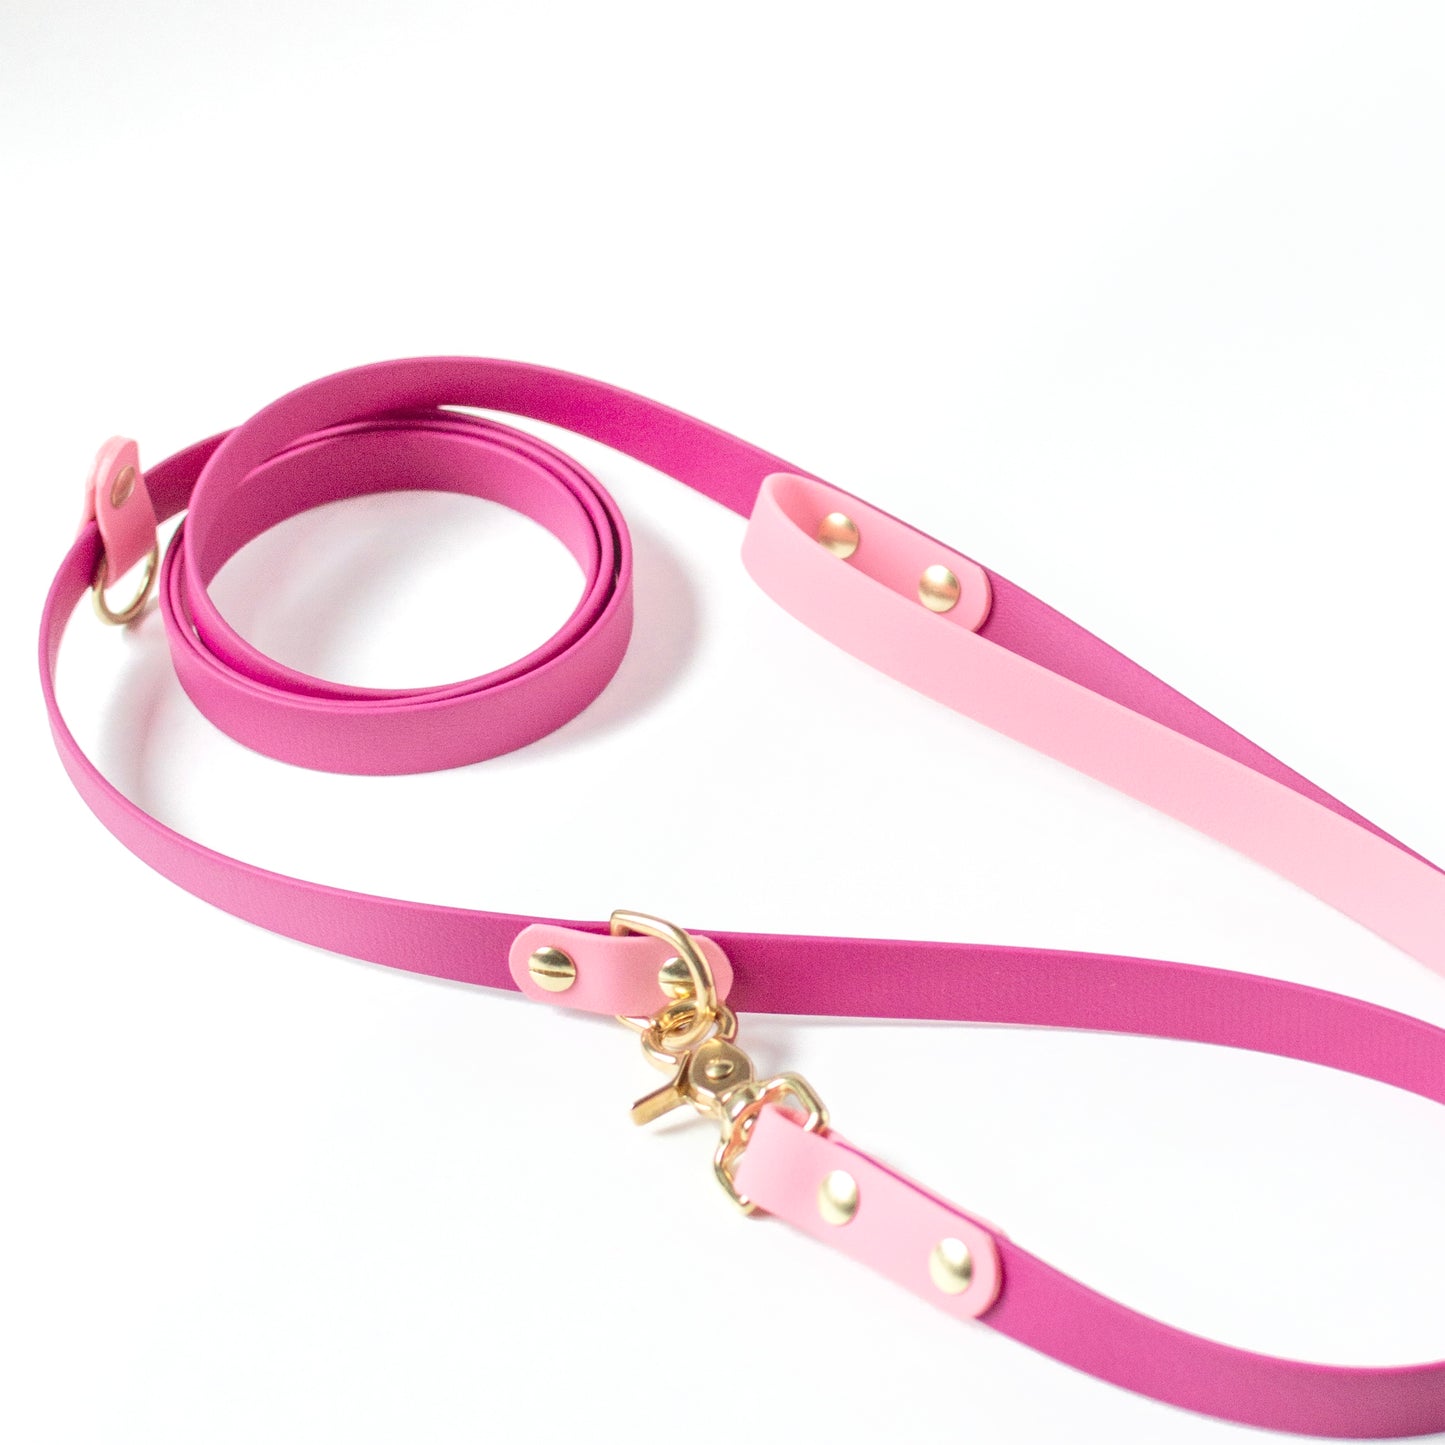 Two-tone biothane hands free dog leash. Vegan Leather. Handmade with biothane and solid brass hardware in British Columbia, Canada.